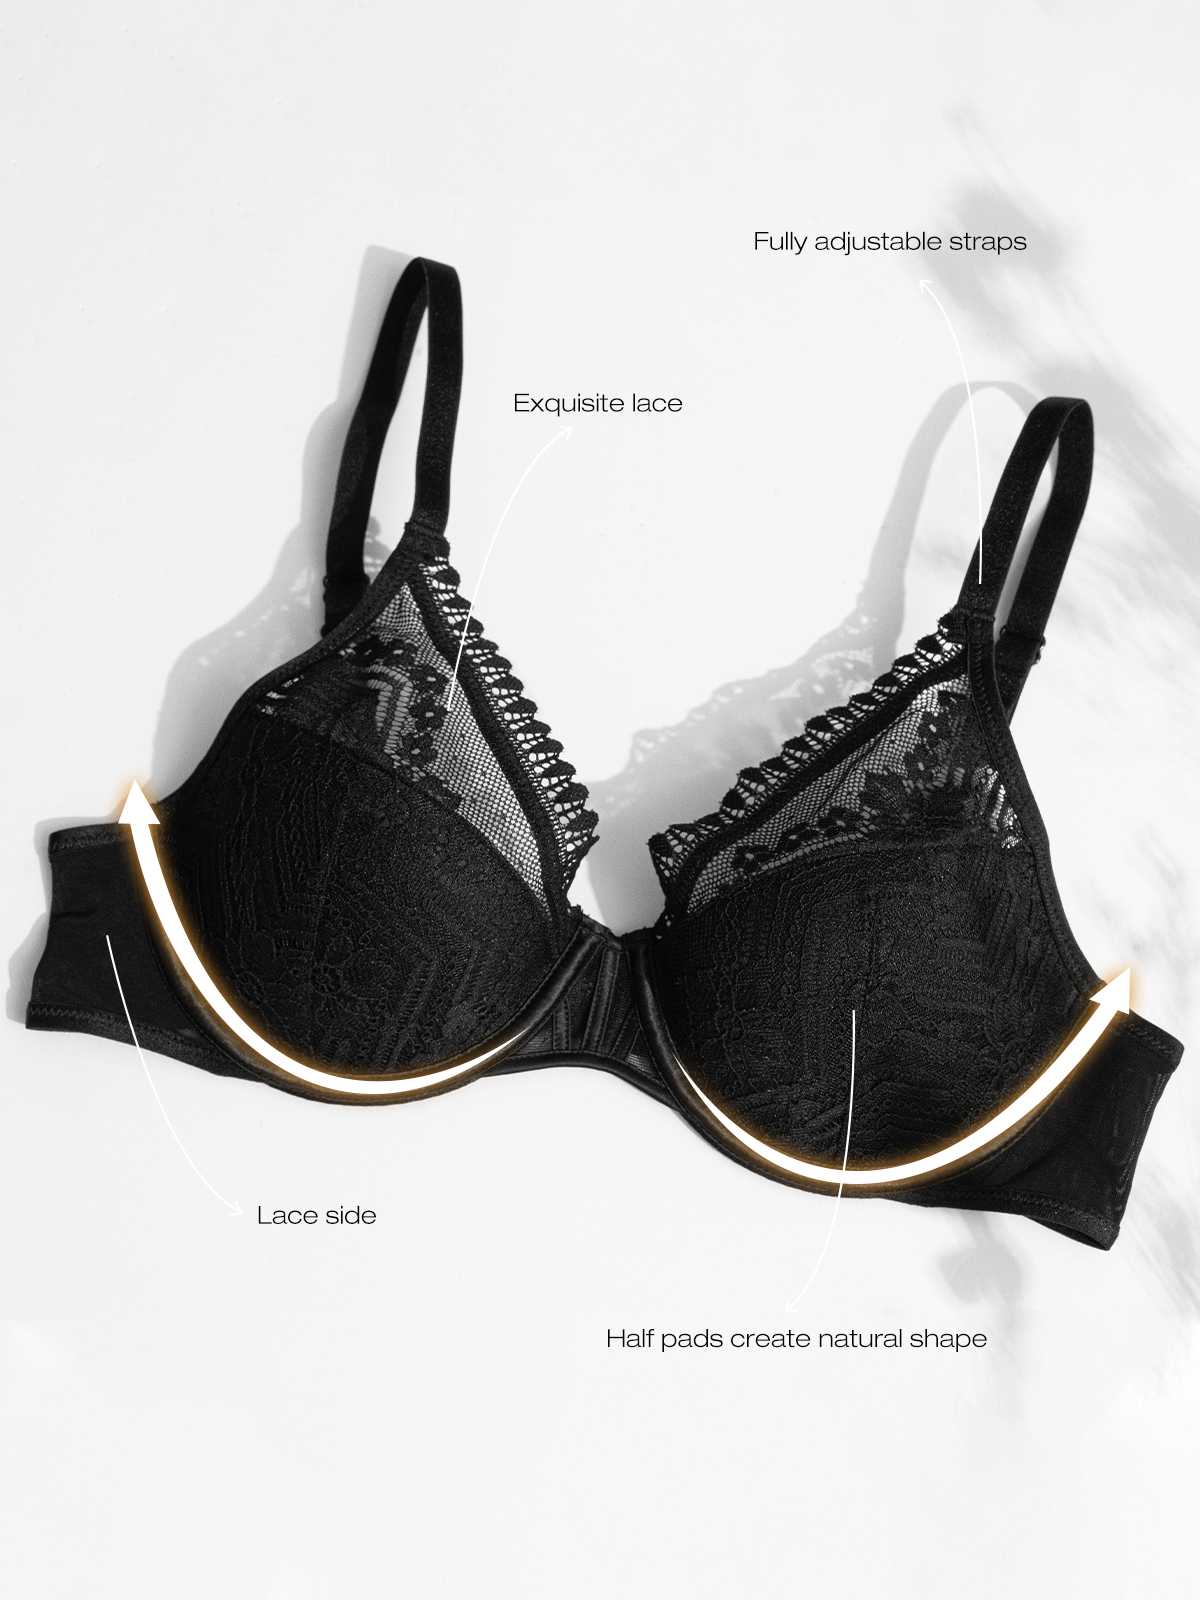 Beauwear Thick Padded Push Up Bras For Women A B C Cup Deep V Plus Size 36  38 40 42 Floral Lace Emboridery Adjusted Straps Bra 220511 From Long005,  $8.59